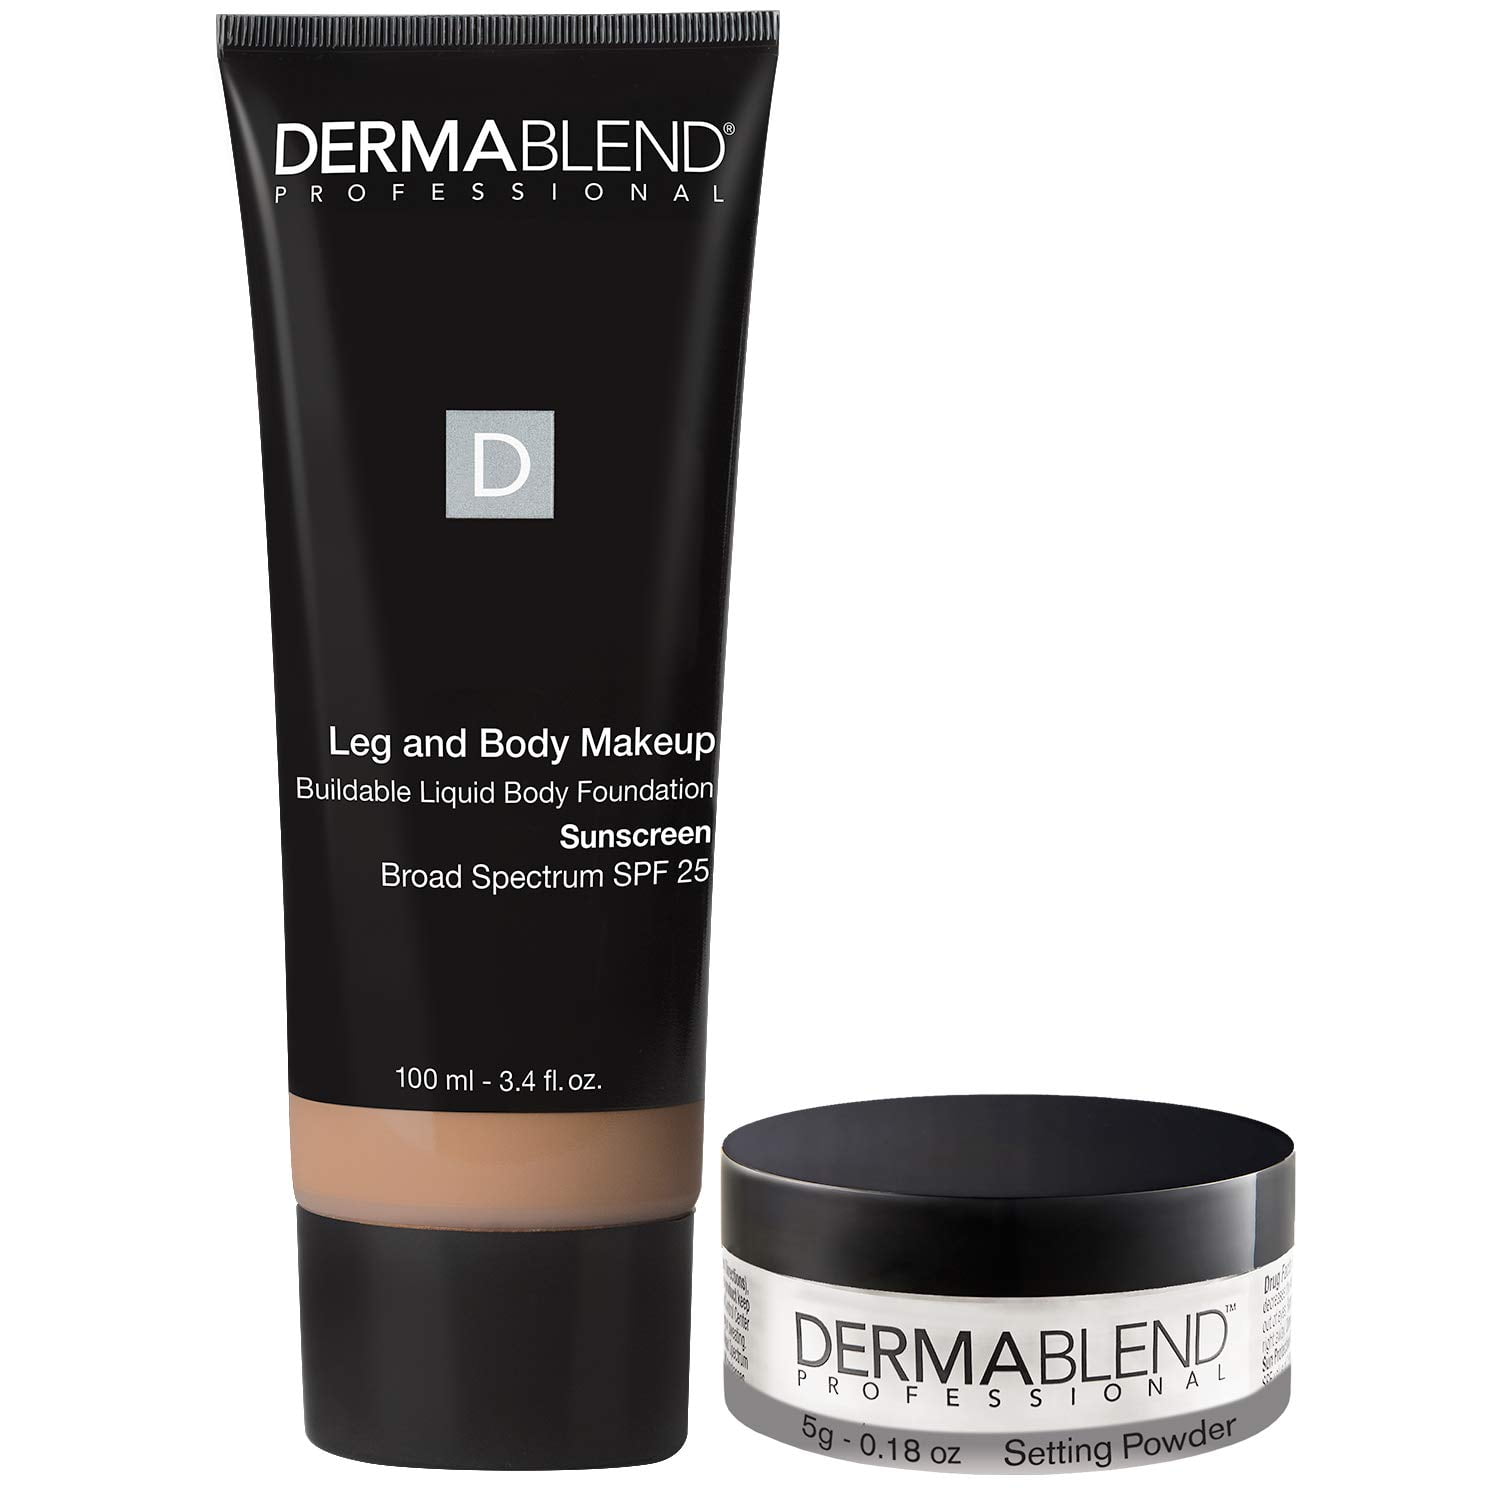 Dermablend Leg and Body Makeup, with SPF 25. Skin Perfecting Body  Foundation for Flawless Legs with a Smooth, Even Tone Finish, 3.4 Fl. Oz. 